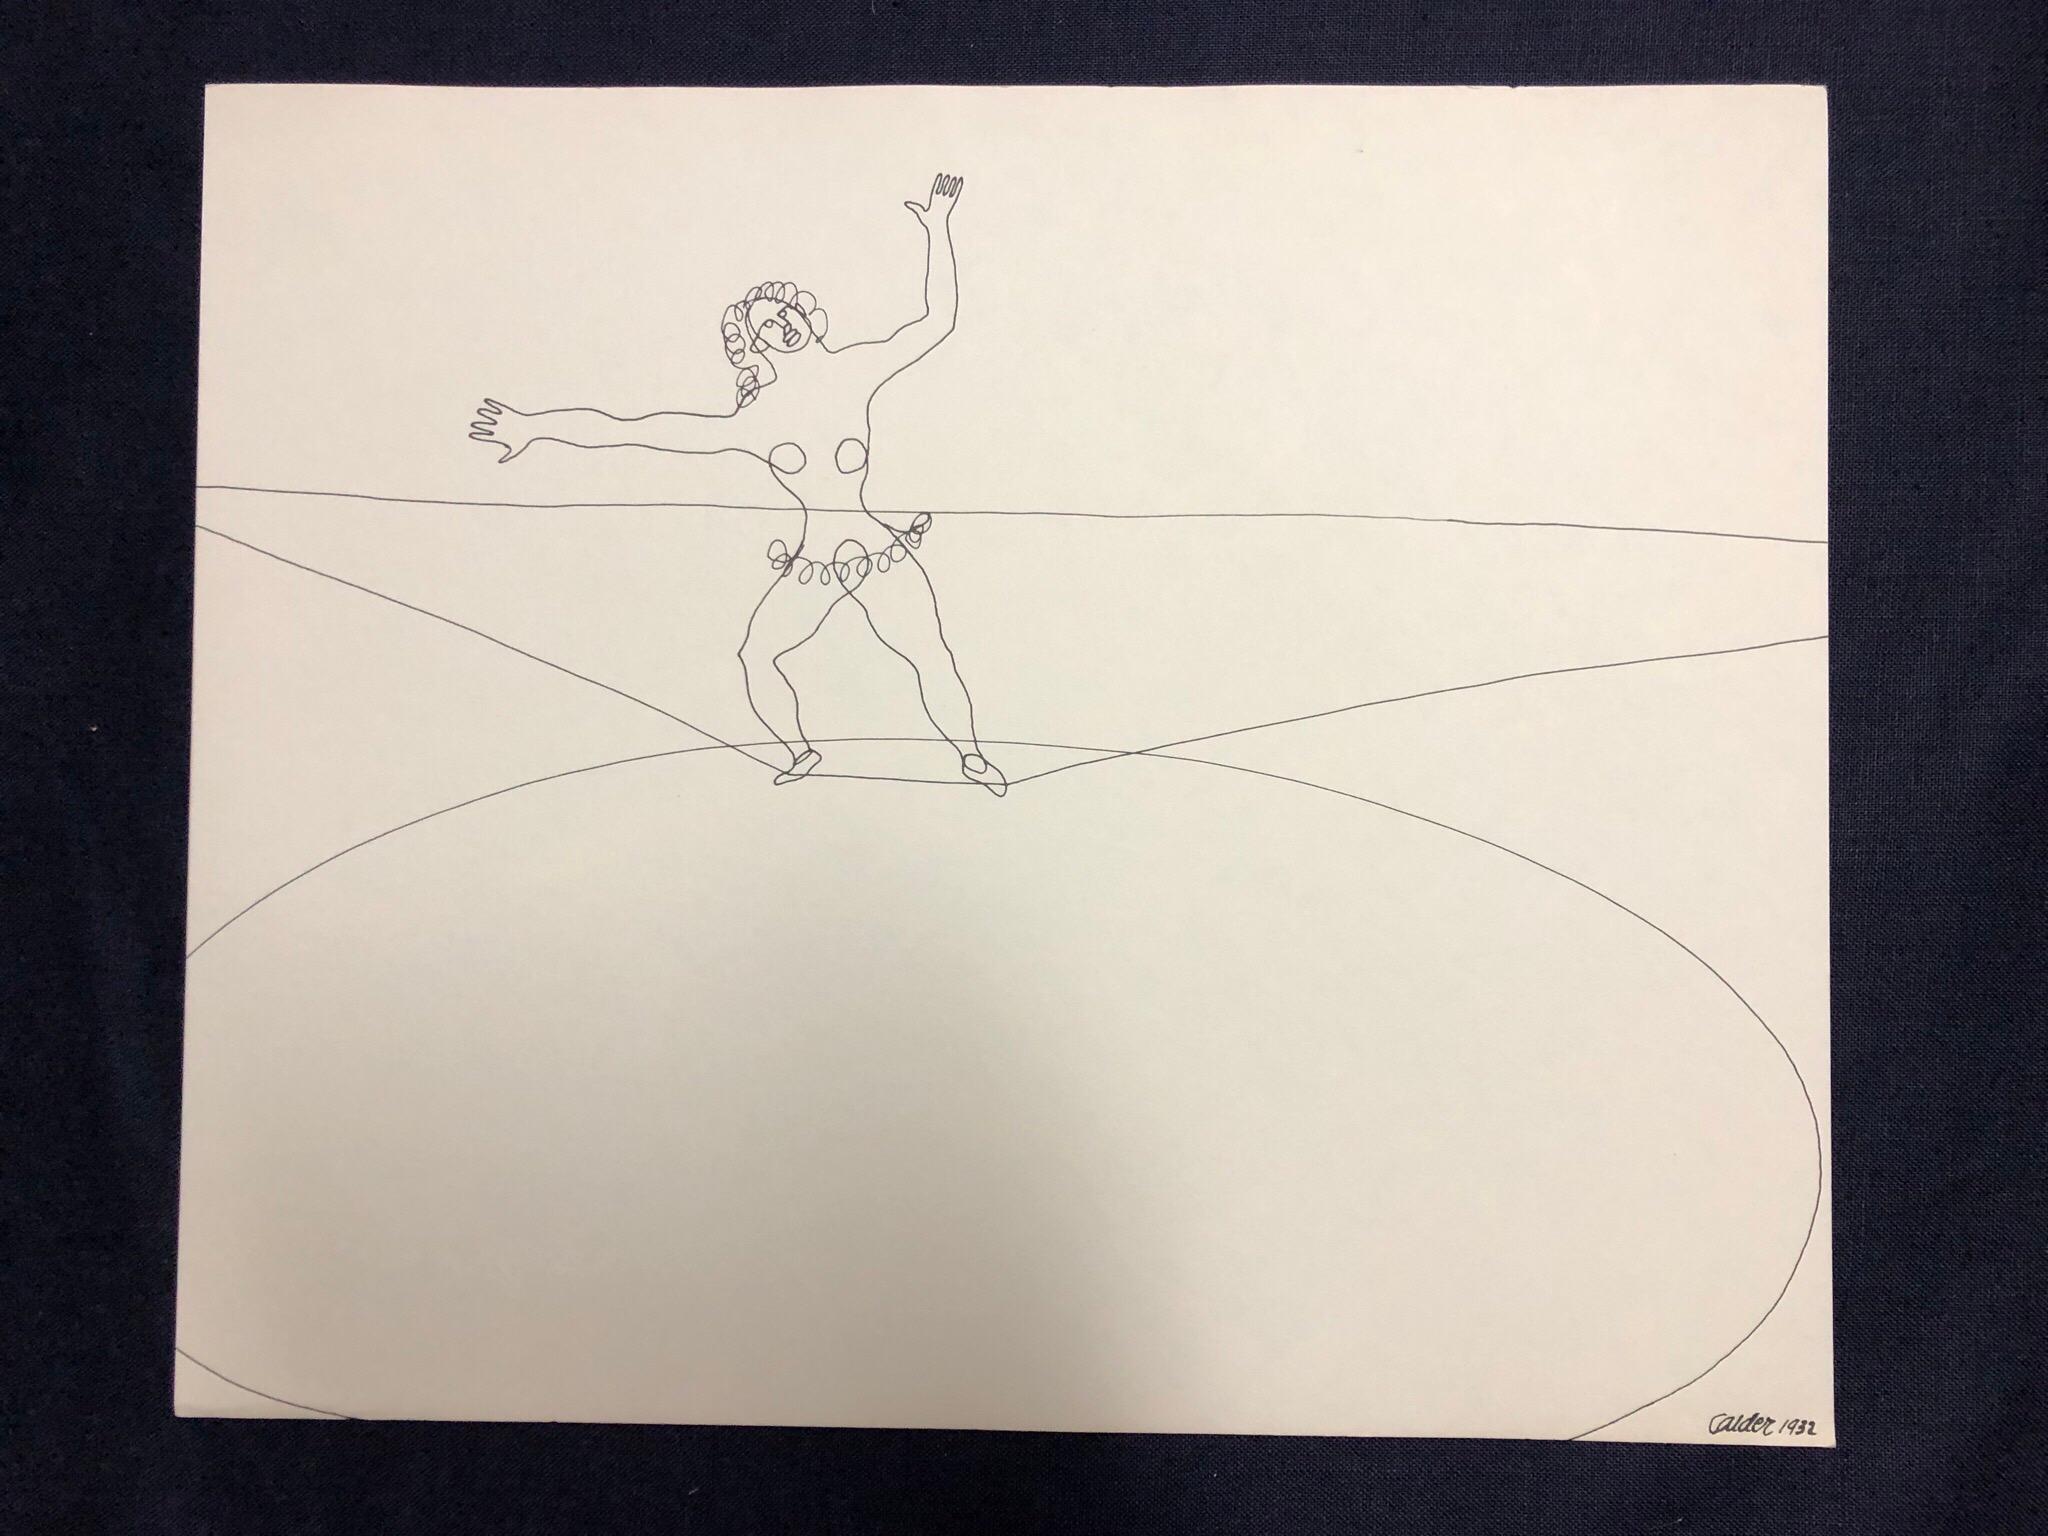 Calder Circus, Complete Set of 16 Lithographs After the Original Drawings 2